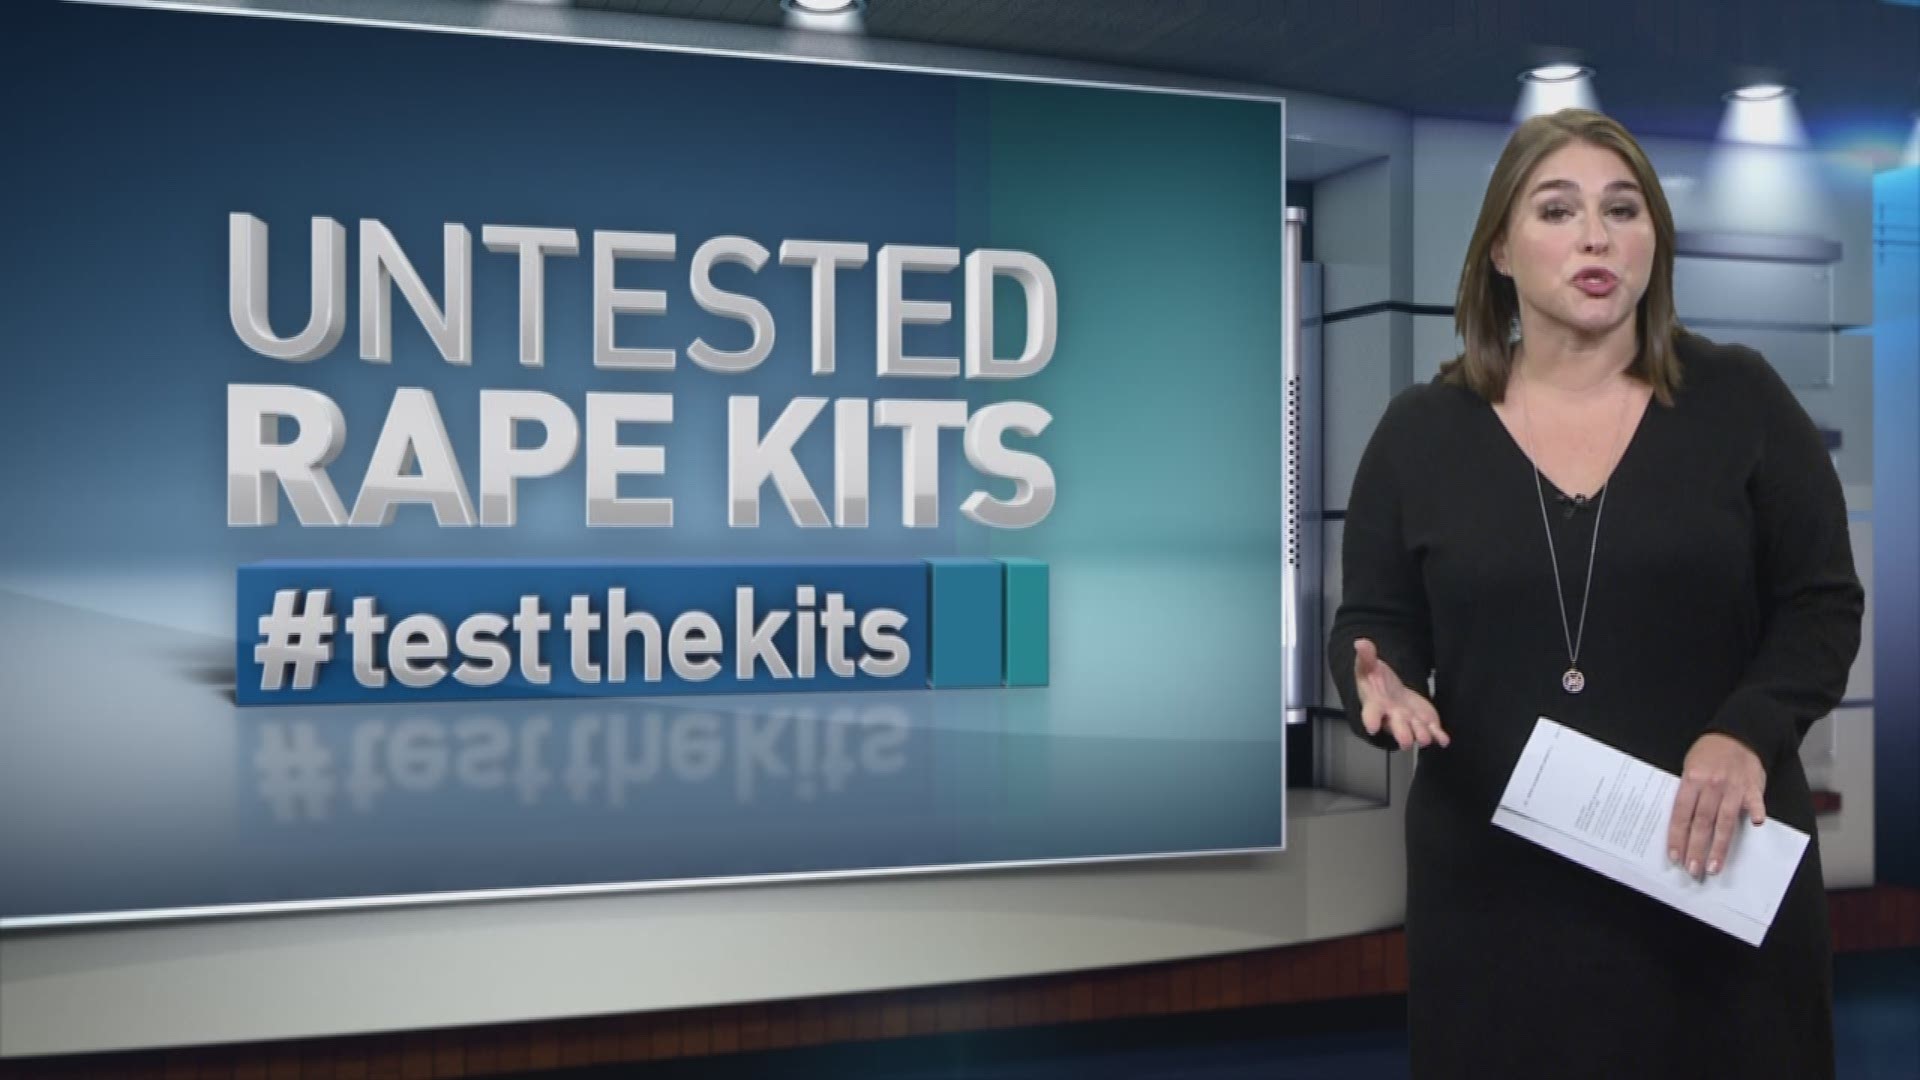 Big developments in our investigation into Virginia's rape kit backlog. We now know how many more kits need to be tested in order to completely eliminate it.